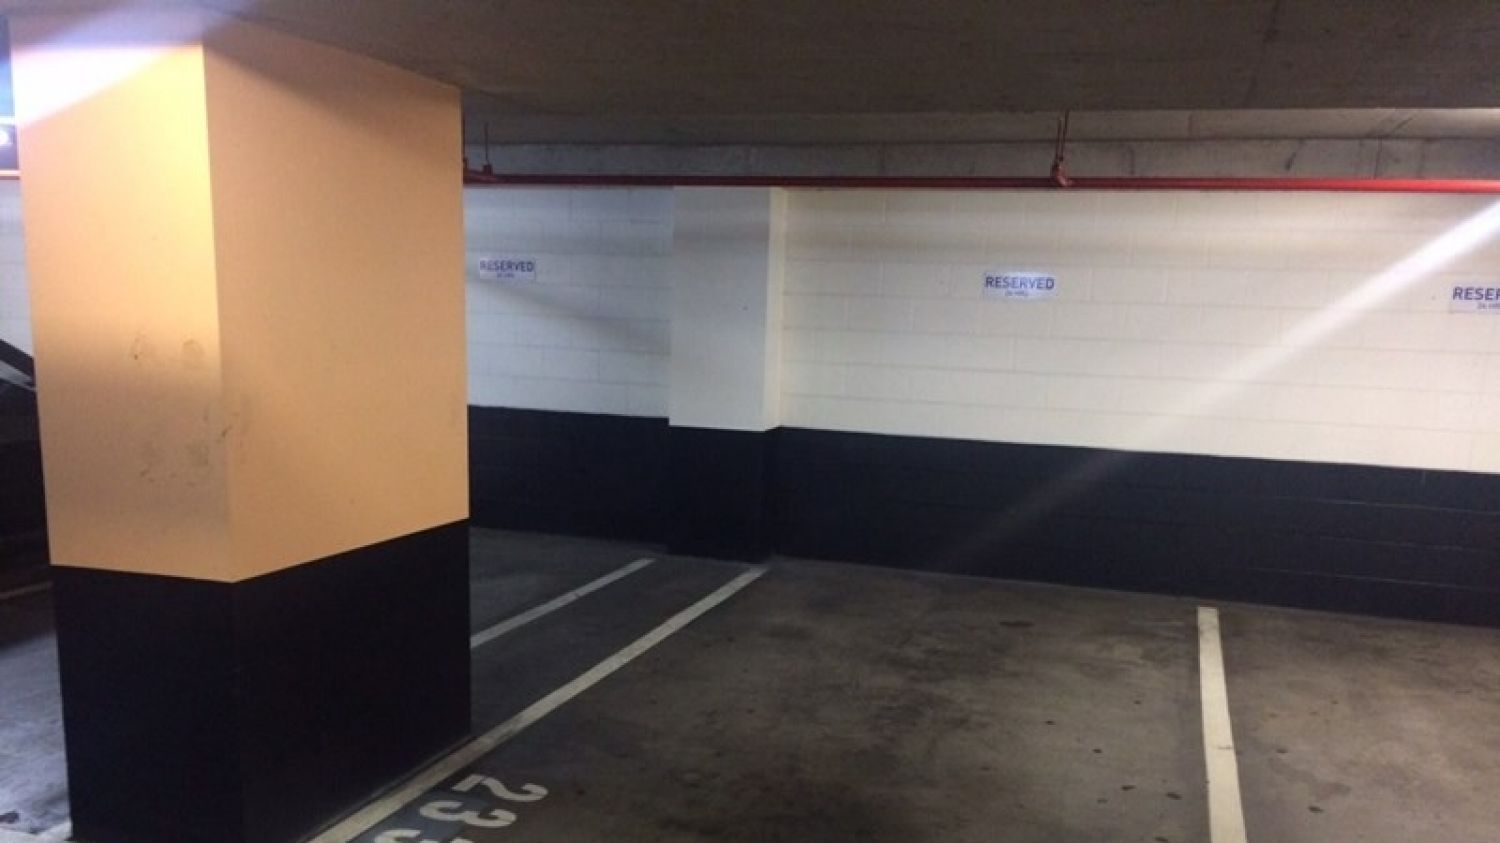 In Melbourne's Exhibition Street at $65,000 you can have a car space ... but no car.